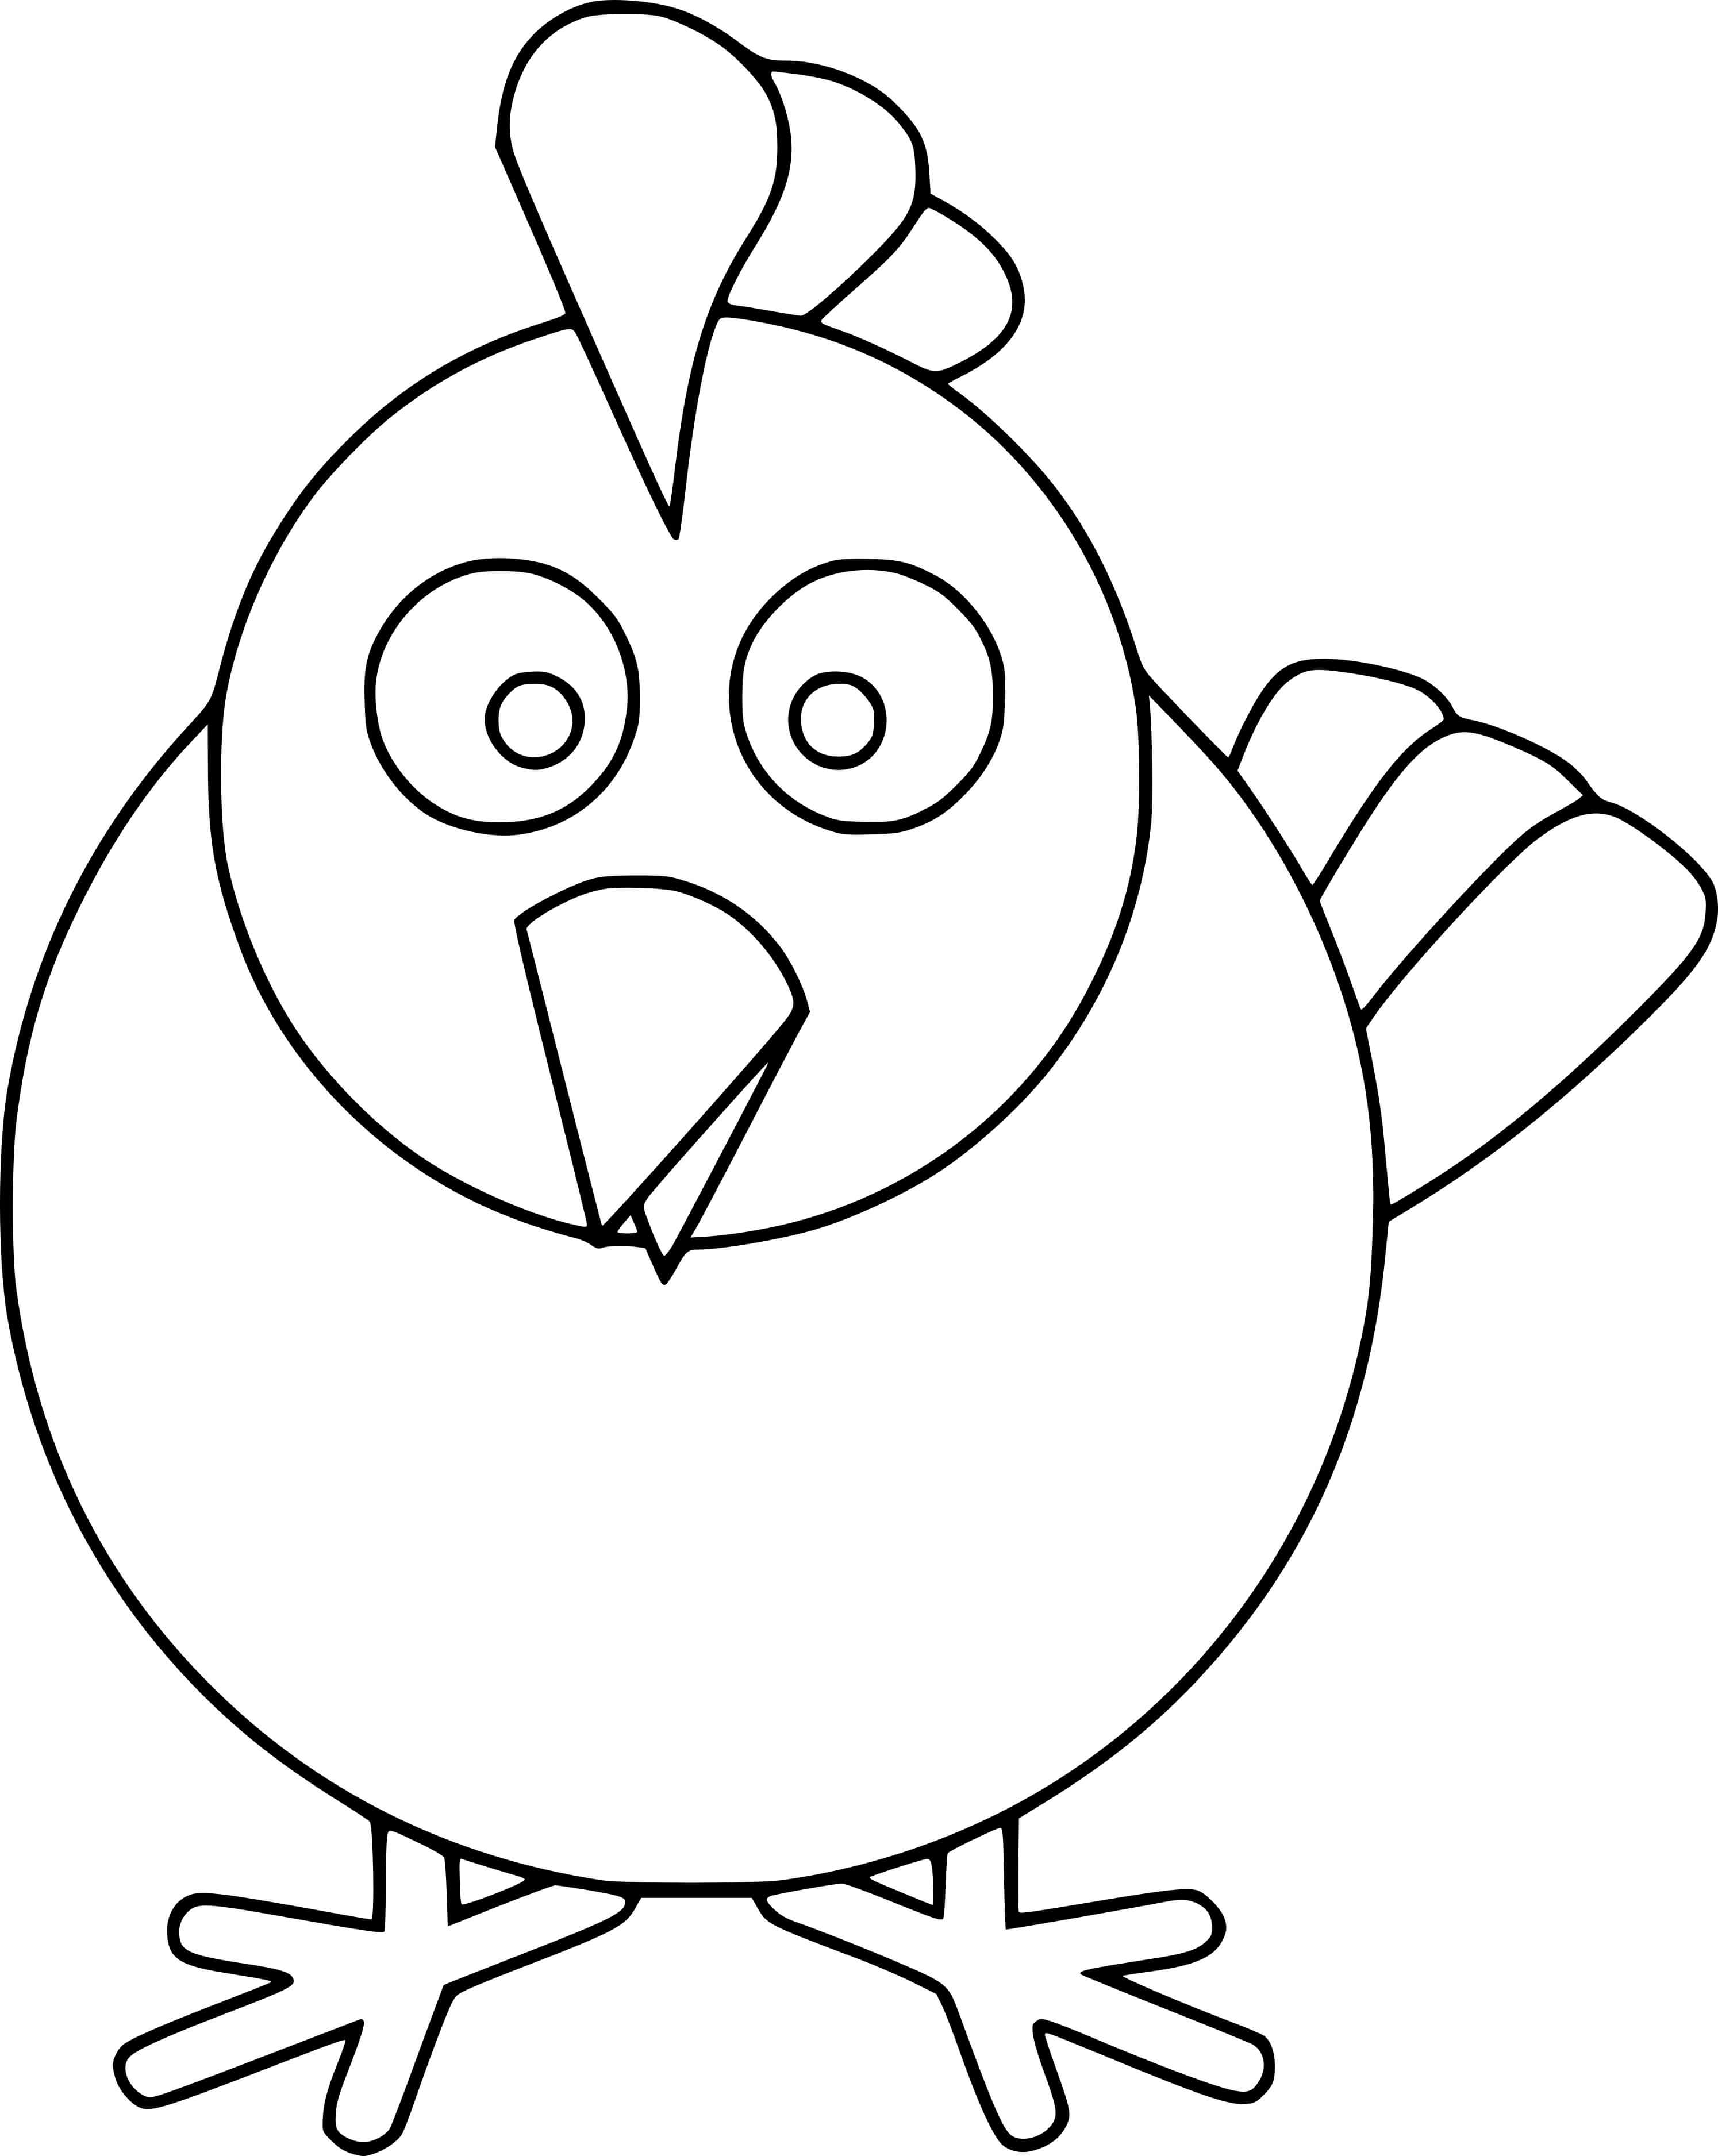 Abstract Chicken Coloring Page